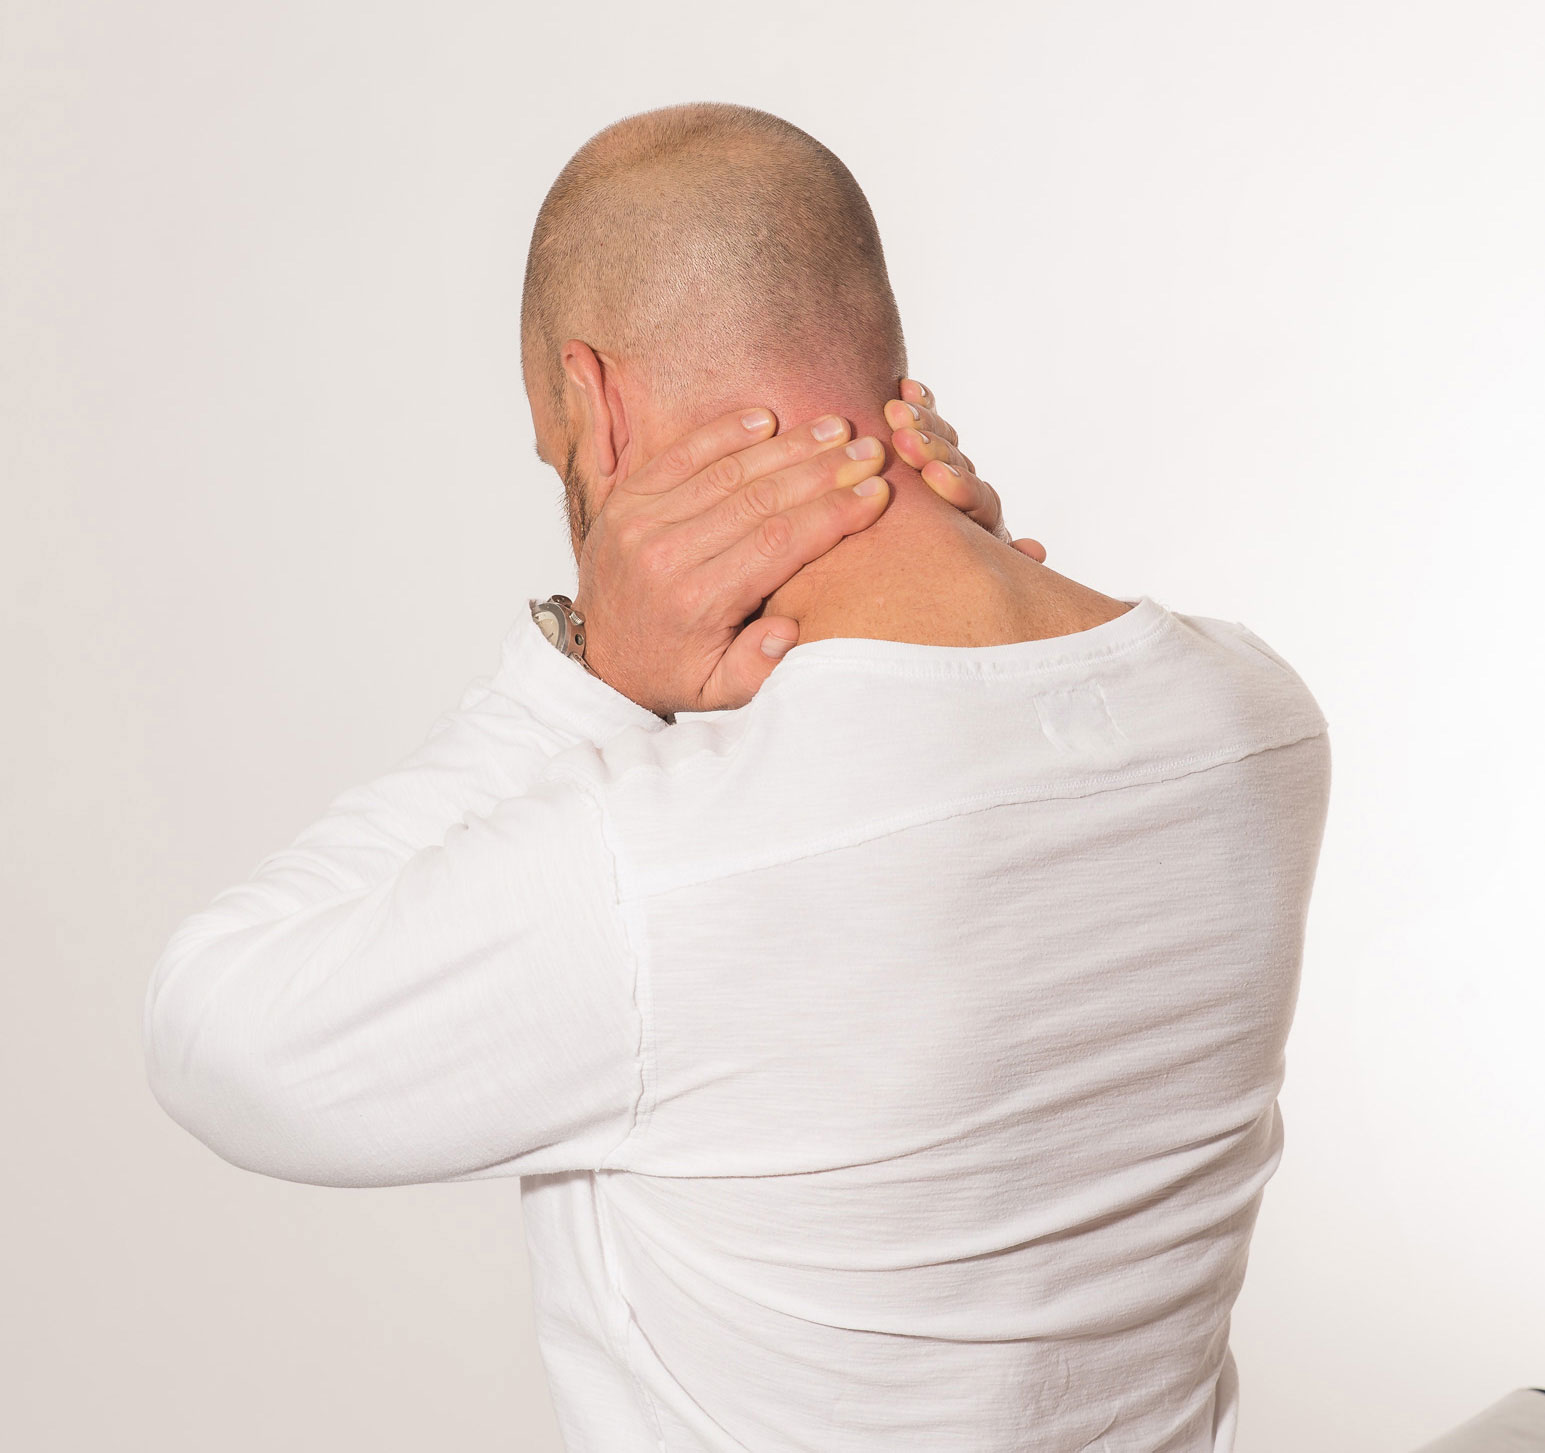 Facing Issues With a Stiff Neck? These Tips Will Help!